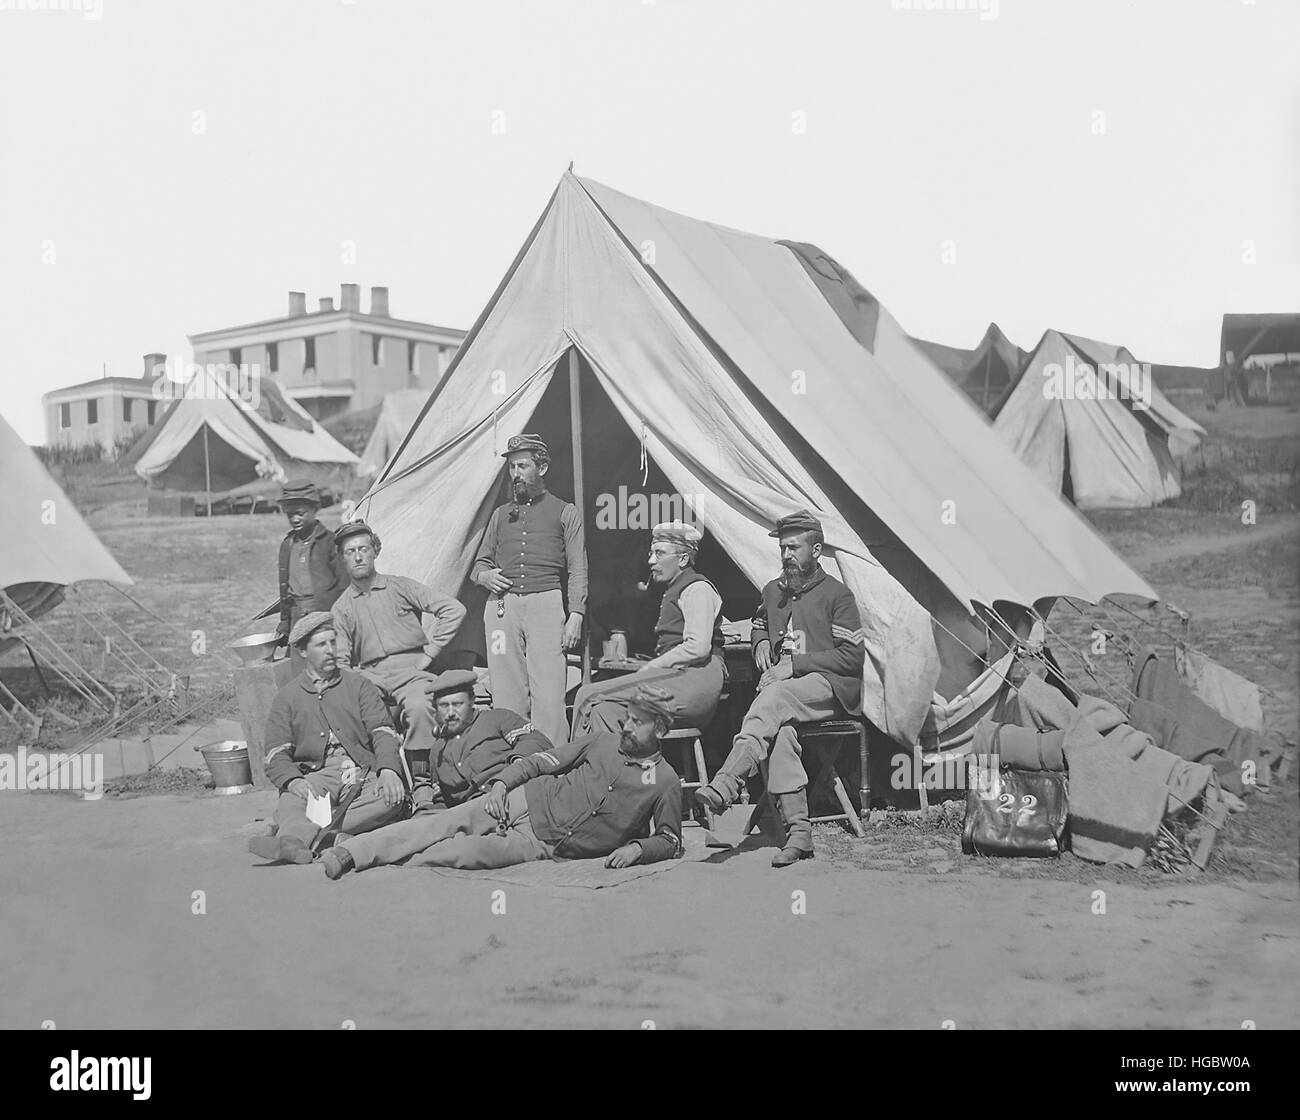 22nd New York Volunteer Infantry at their camp during the American Civil War. Stock Photo